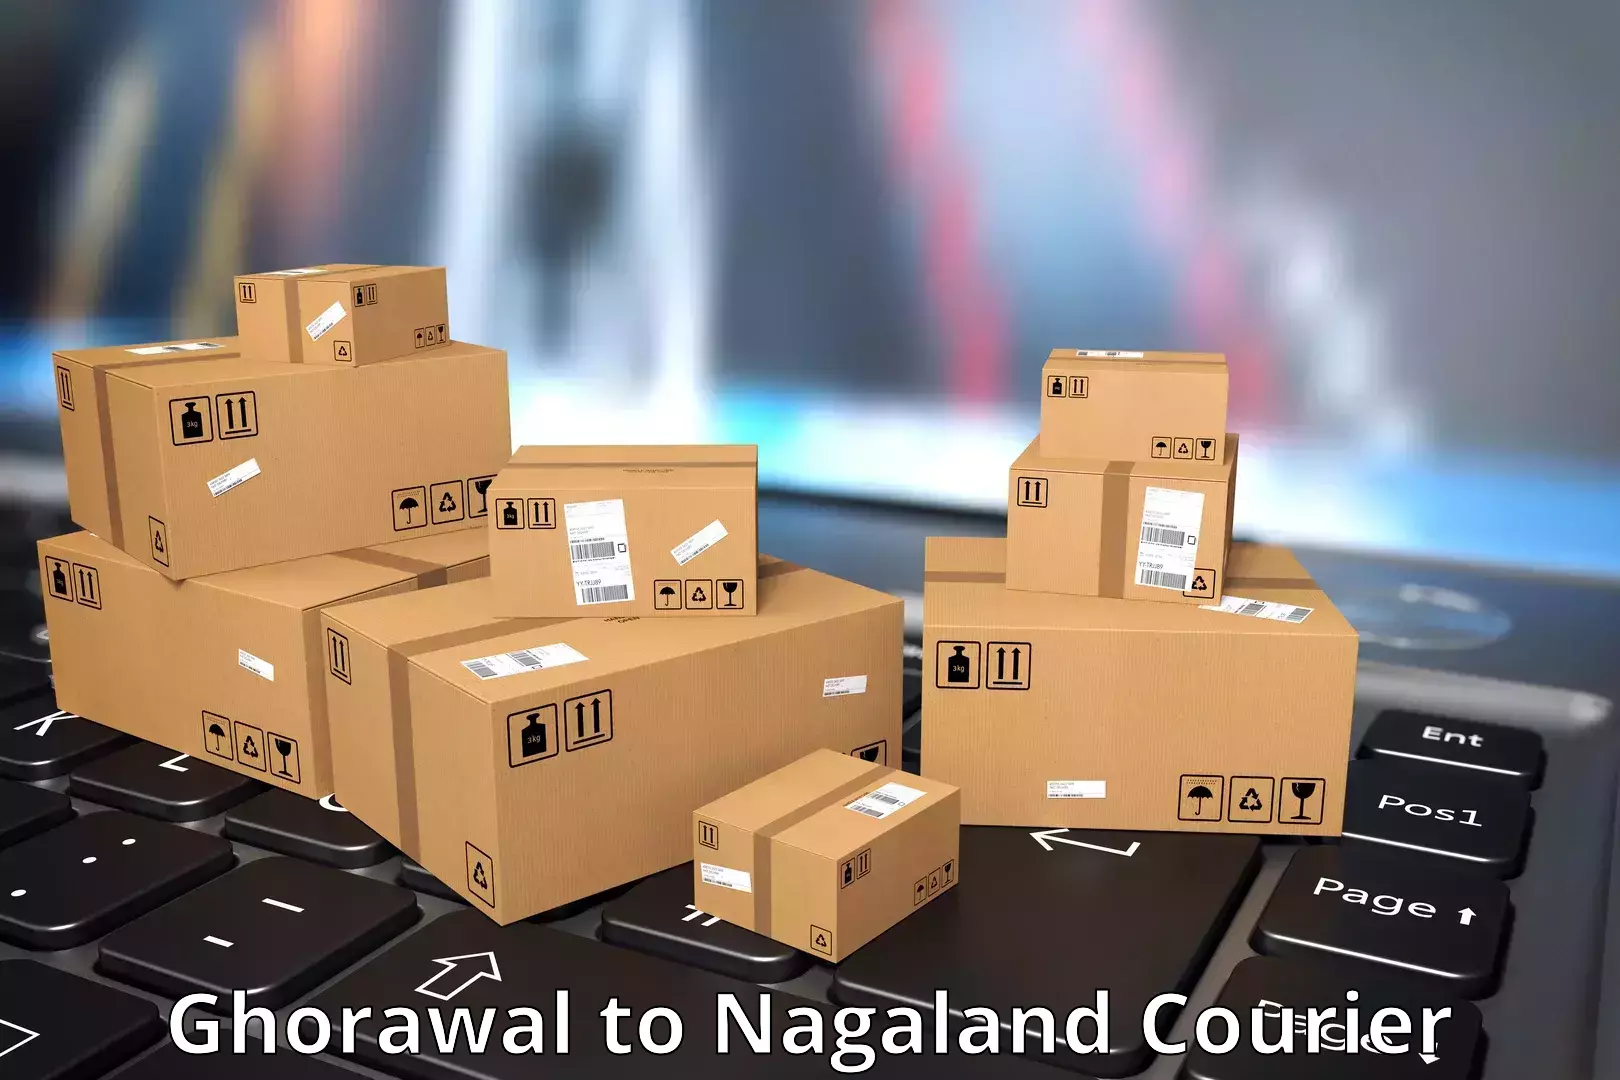 Speedy delivery service Ghorawal to Nagaland